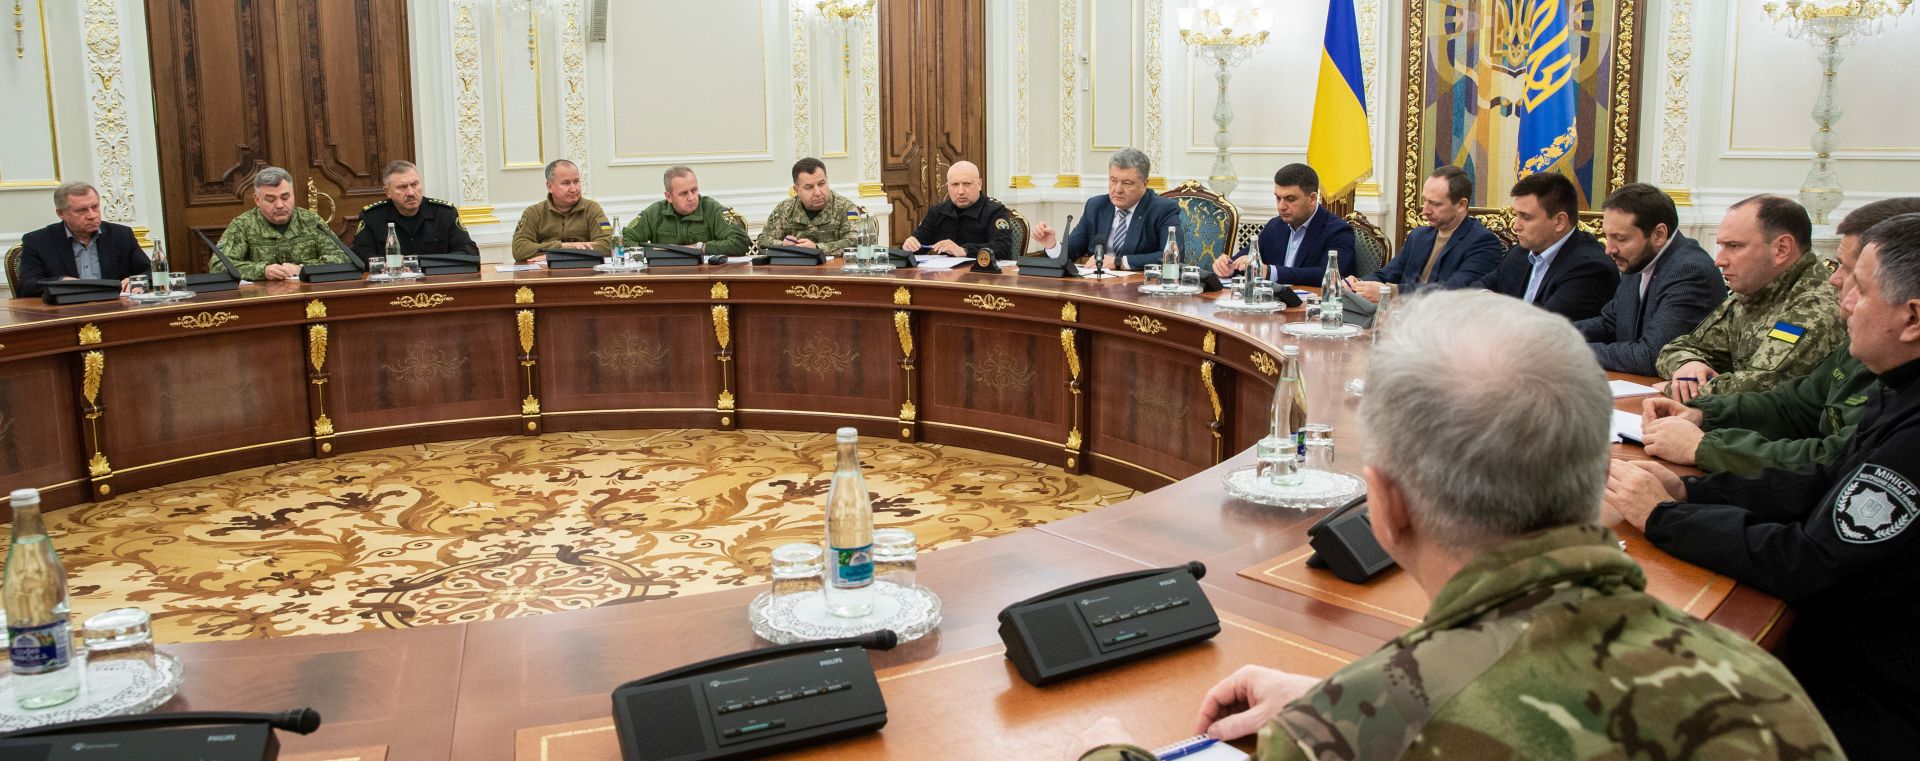 epa07190230 Ukrainian President Petro Poroshenko (C) leads the National Security and Defence Council meeting in Kiev, Ukraine, 25 November 2018. Russia has seized three Ukrainian vessels amid their leaving the Kerch Strait; Ukrainian President Petro Poroshenko is gathering the Military Cabinet over the incident. The two small-sized `Berdiansk` and `Nikopol` armored artillery boats have come under enemy fire and are now dead in the water. The `Yany Kapu` tugboat has forcibly been stopped. The vessels have been captured by special forces of the Russian Federation, the press service of Ukraine`s Navy said on Facebook on Sunday evening. The Ukrainian Navy also reported the number of the Ukrainian servicemen wounded in the incident grew to two persons as Ukrainian media report.  EPA/MYKHAILO MARKIV / POOL